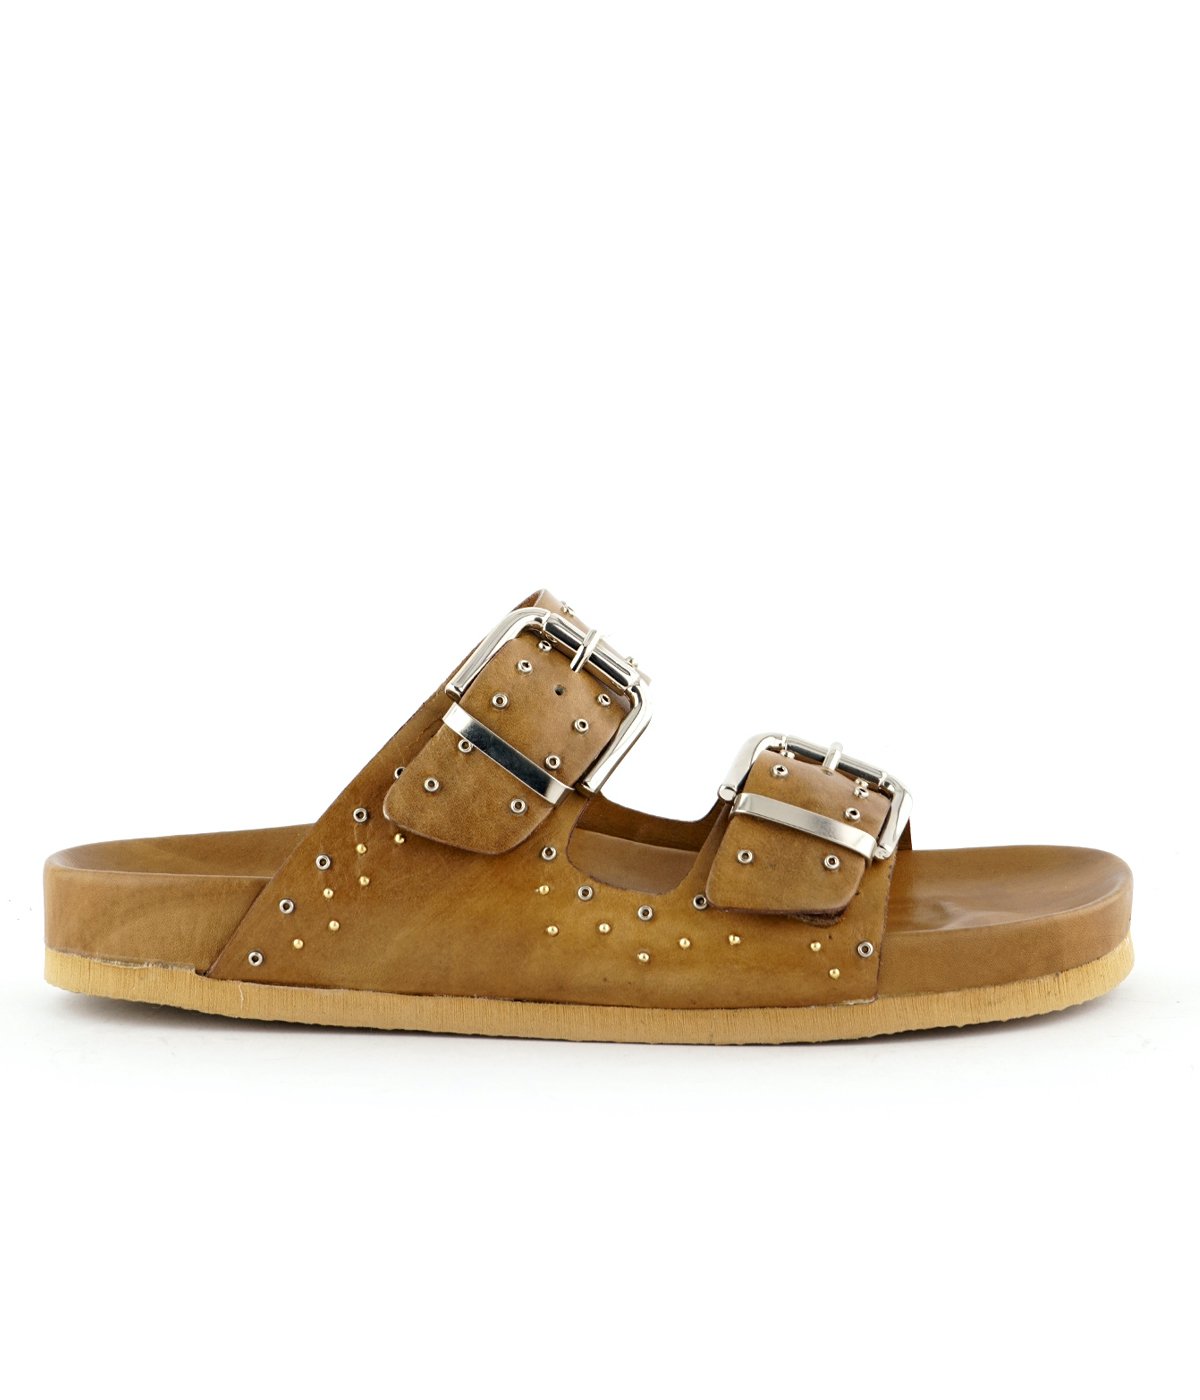 Lexi Sandals in Noce